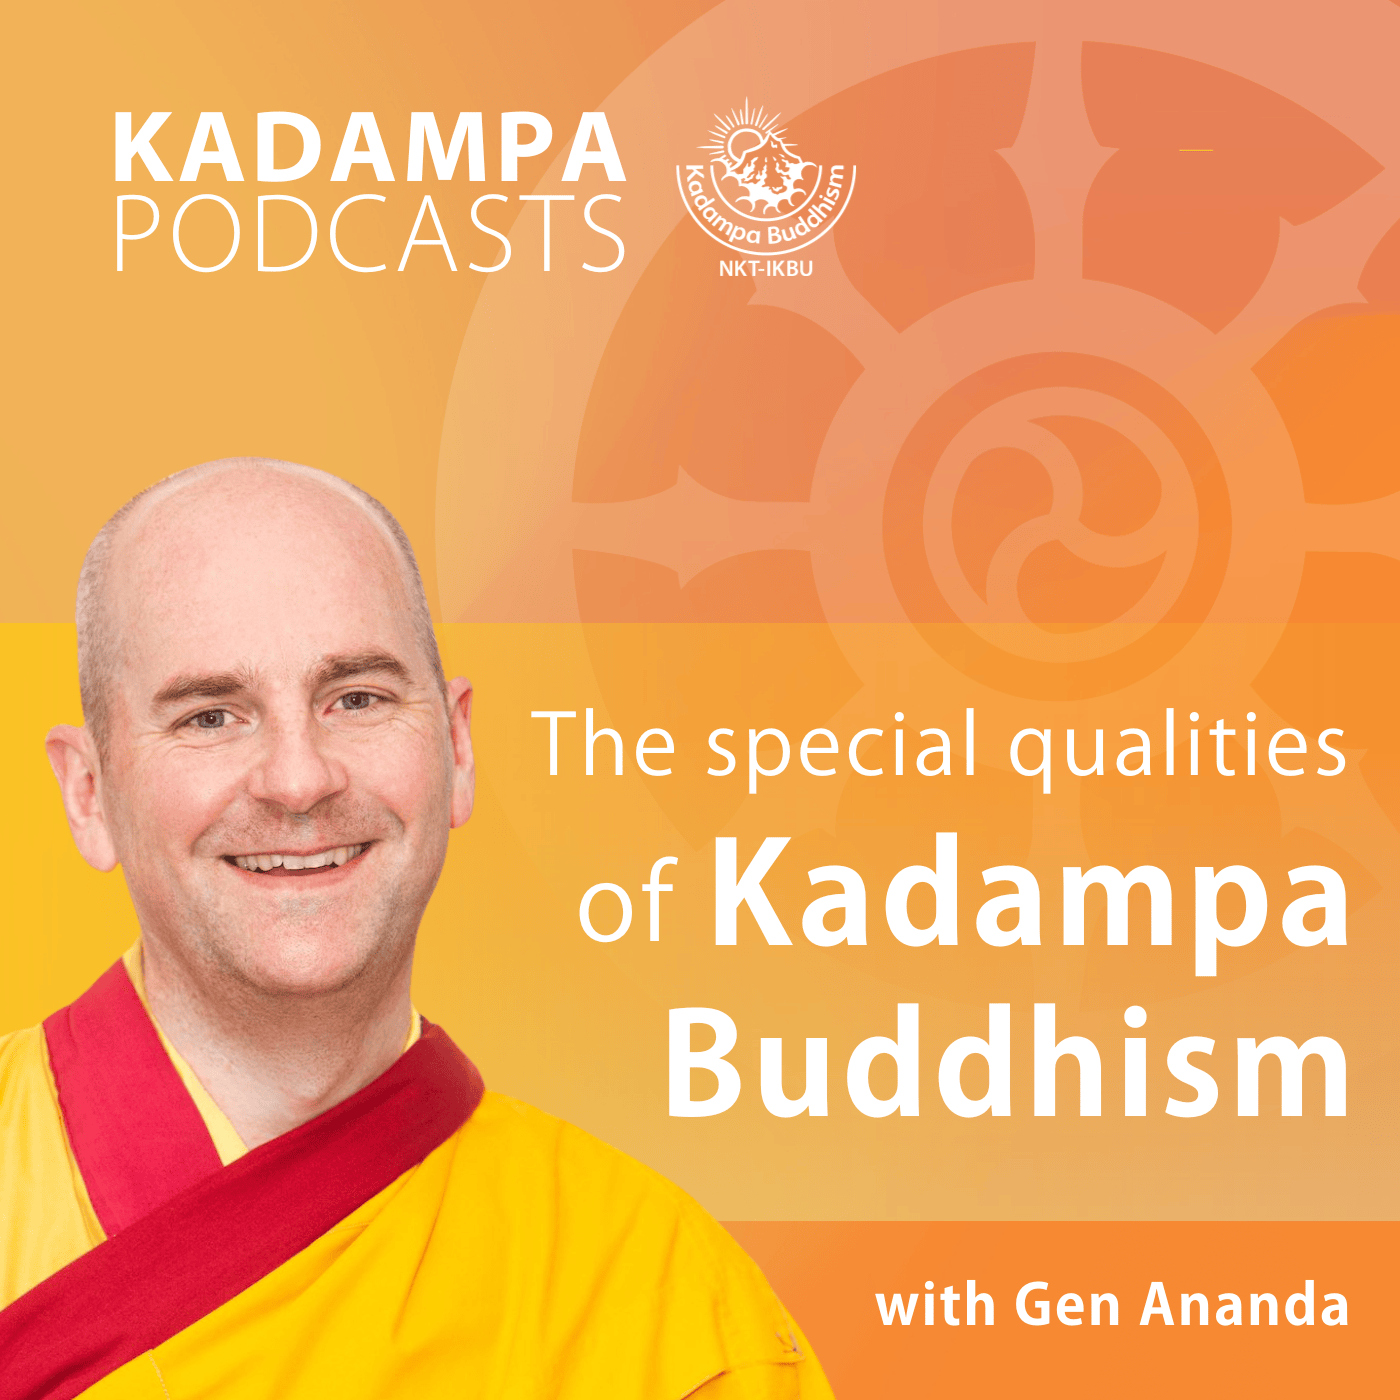 The special qualities of Kadampa Buddhism